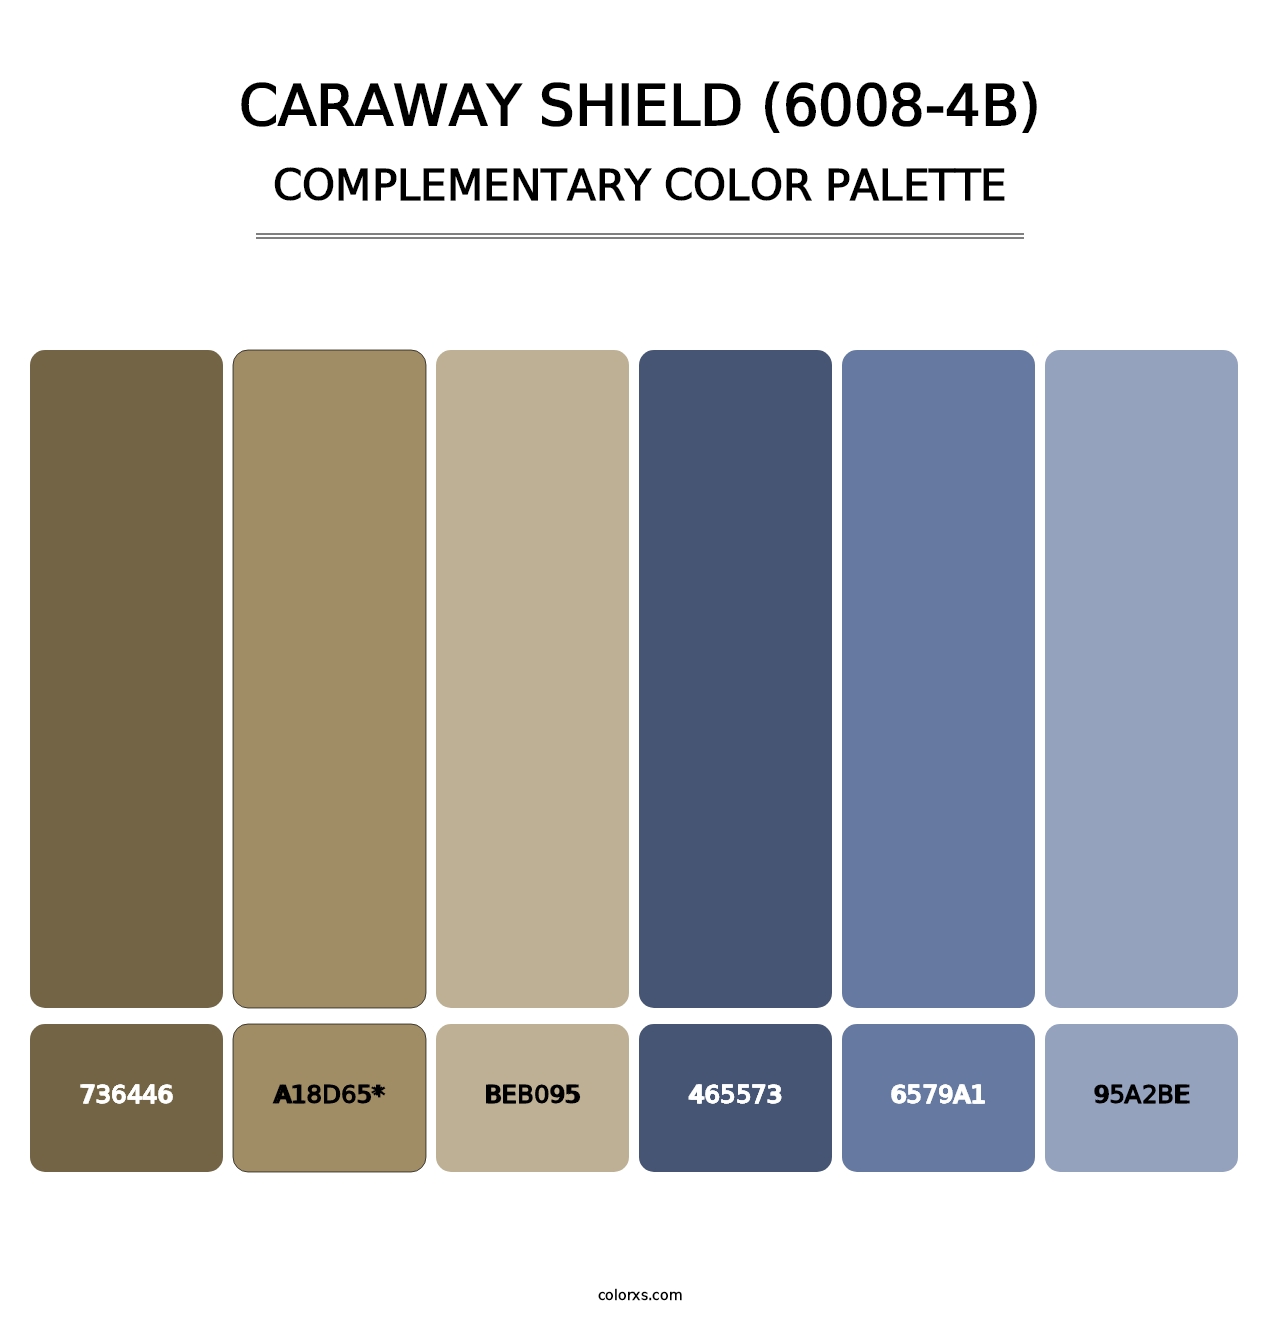 Caraway Shield (6008-4B) - Complementary Color Palette